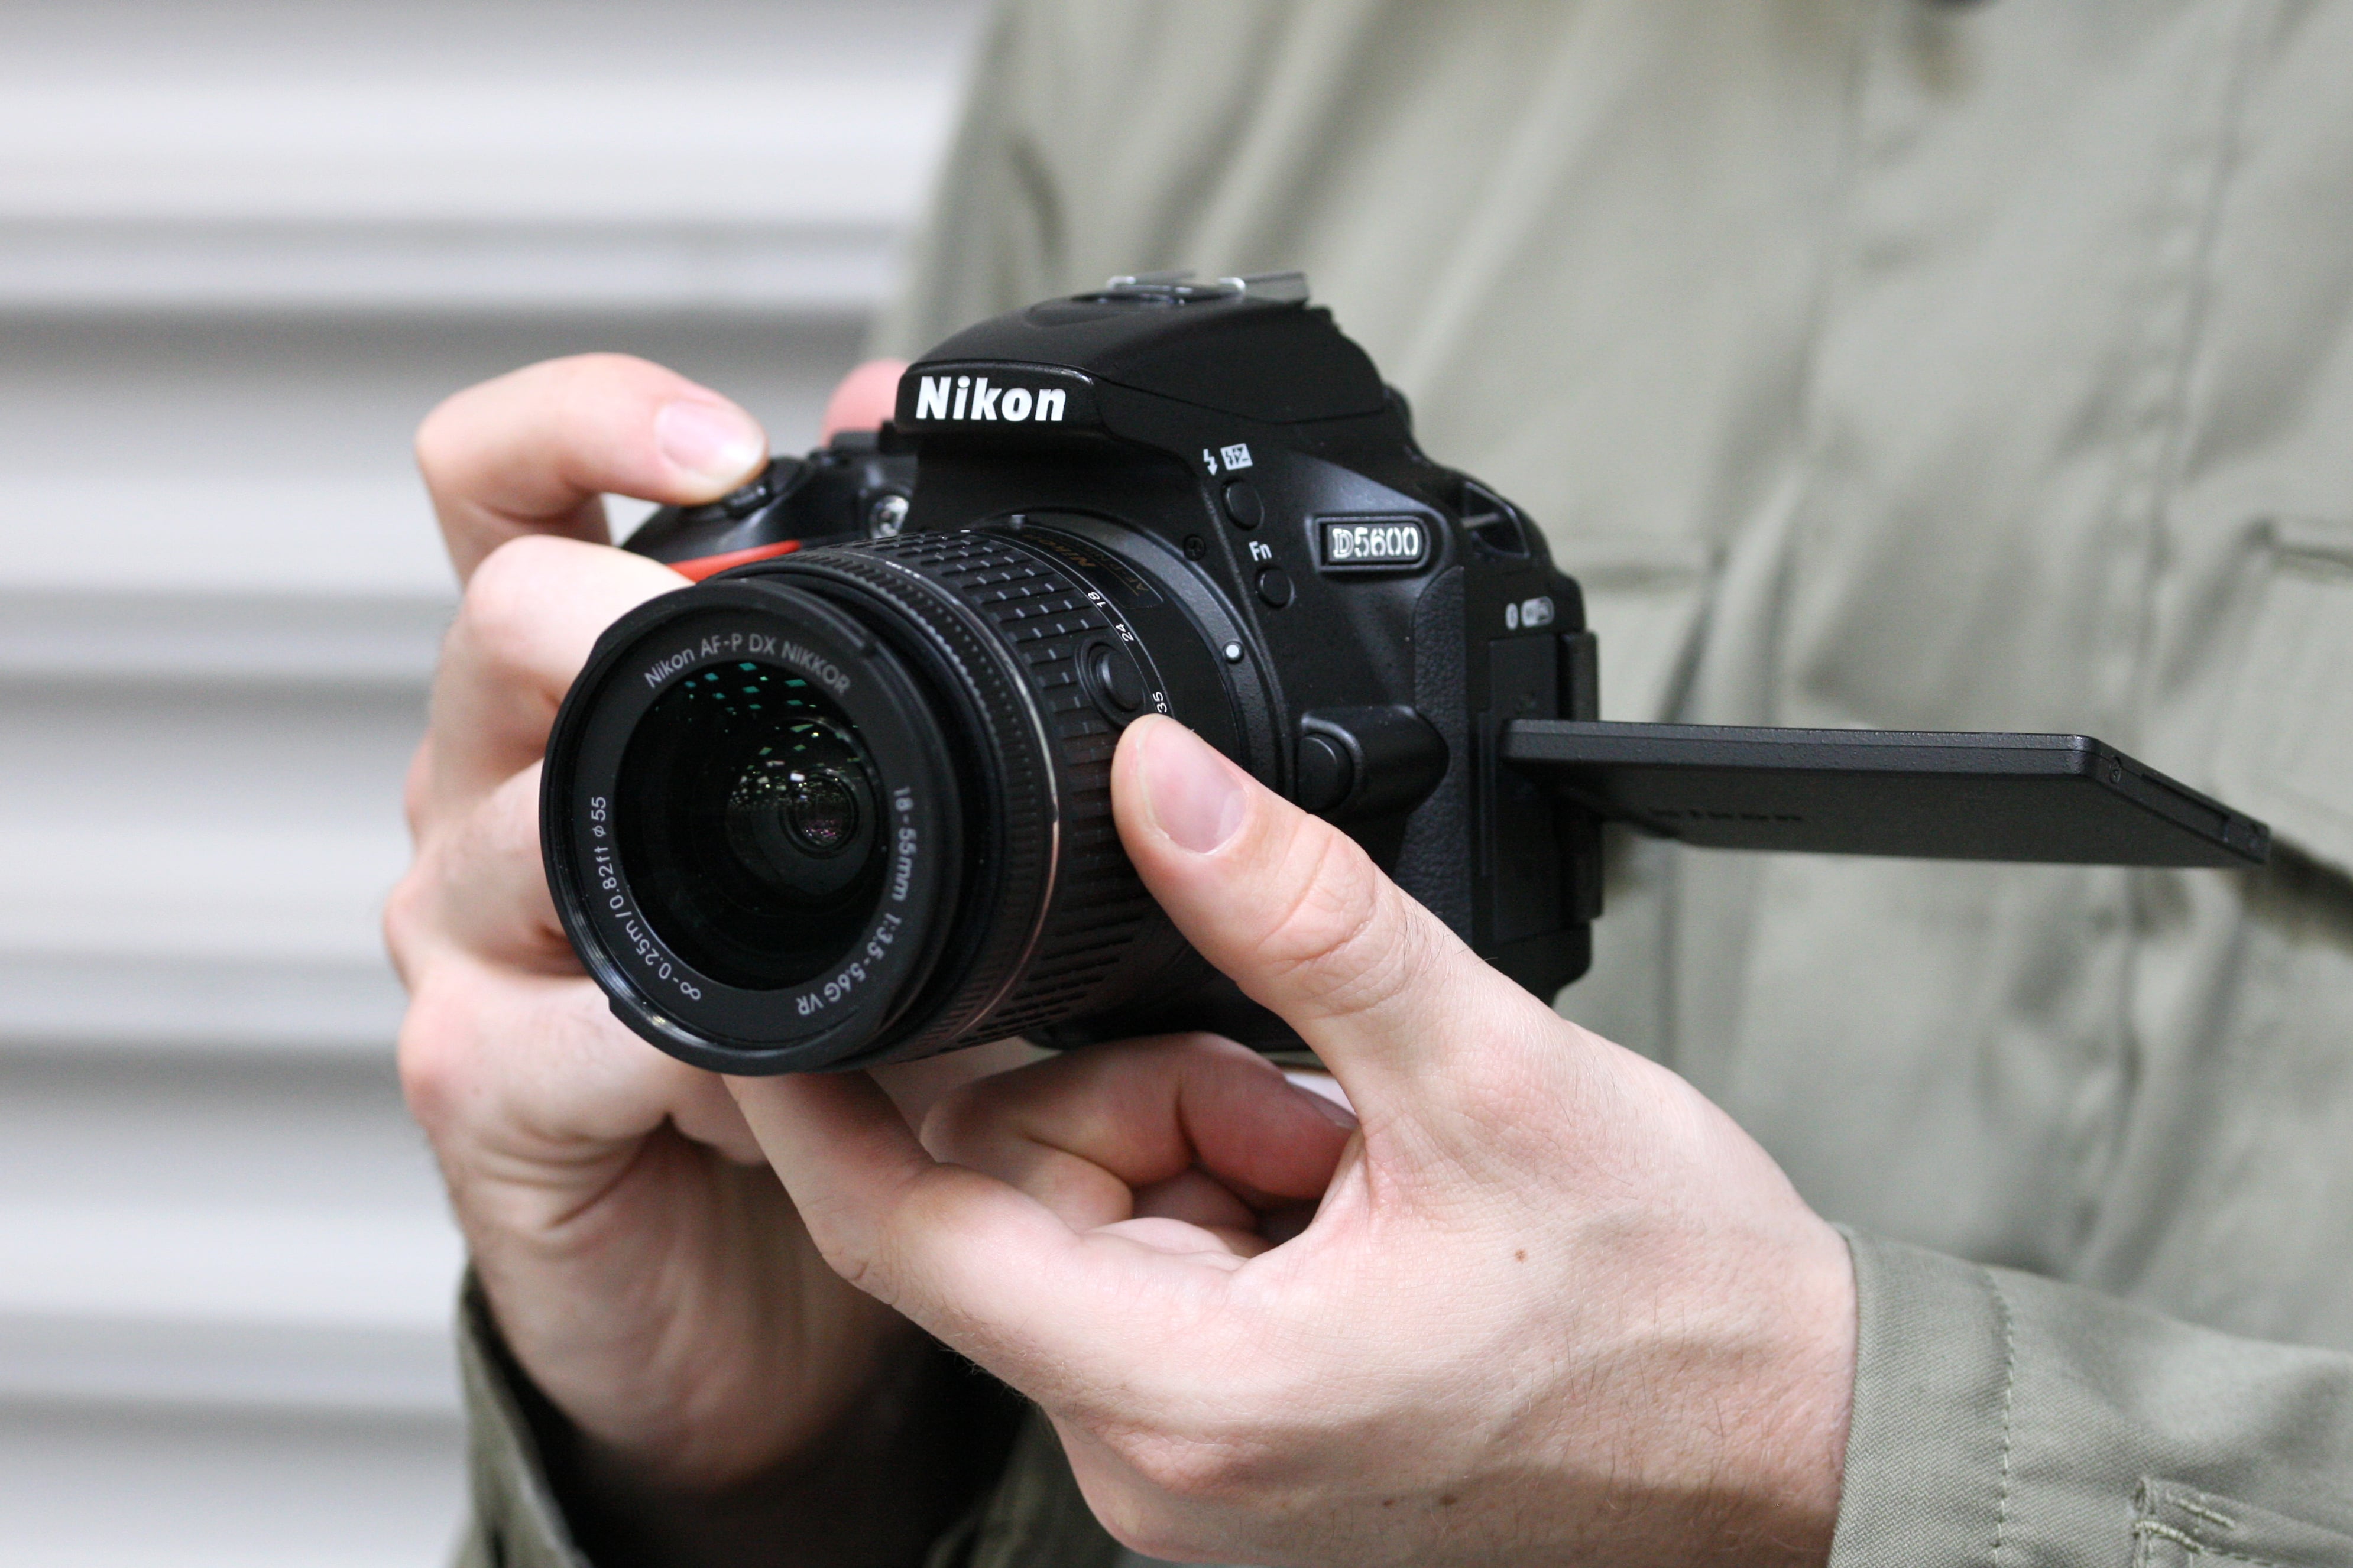 Nikon D5600 DSLR Camera Review and Specification